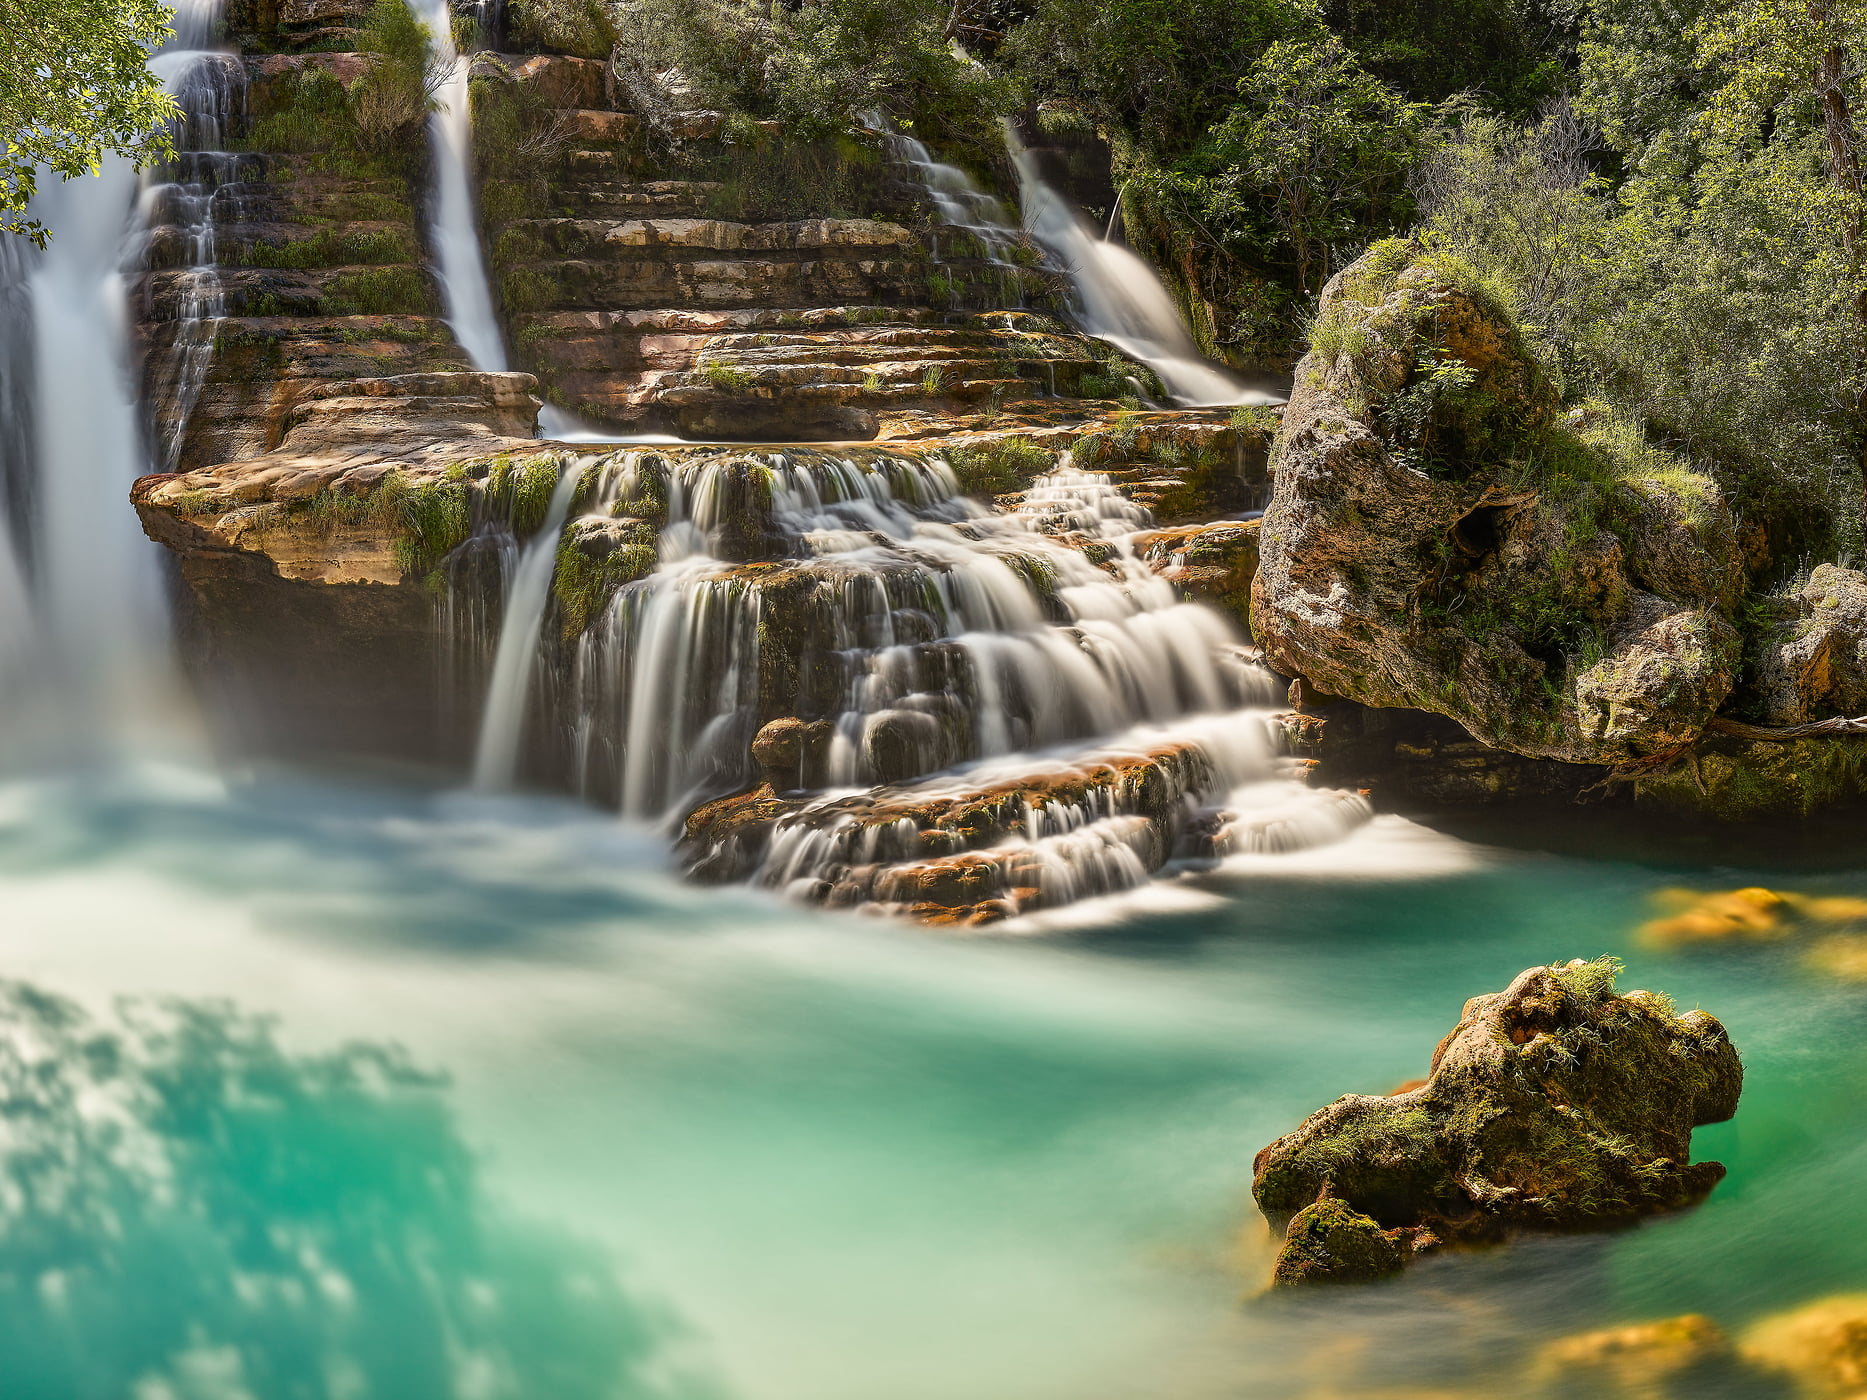 181 megapixels! A very high resolution, large-format VAST photo print of a waterfall and rocks; nature photograph created by David Meaux in Cascade de Navacelles, Navacelles, l'Hérault, France